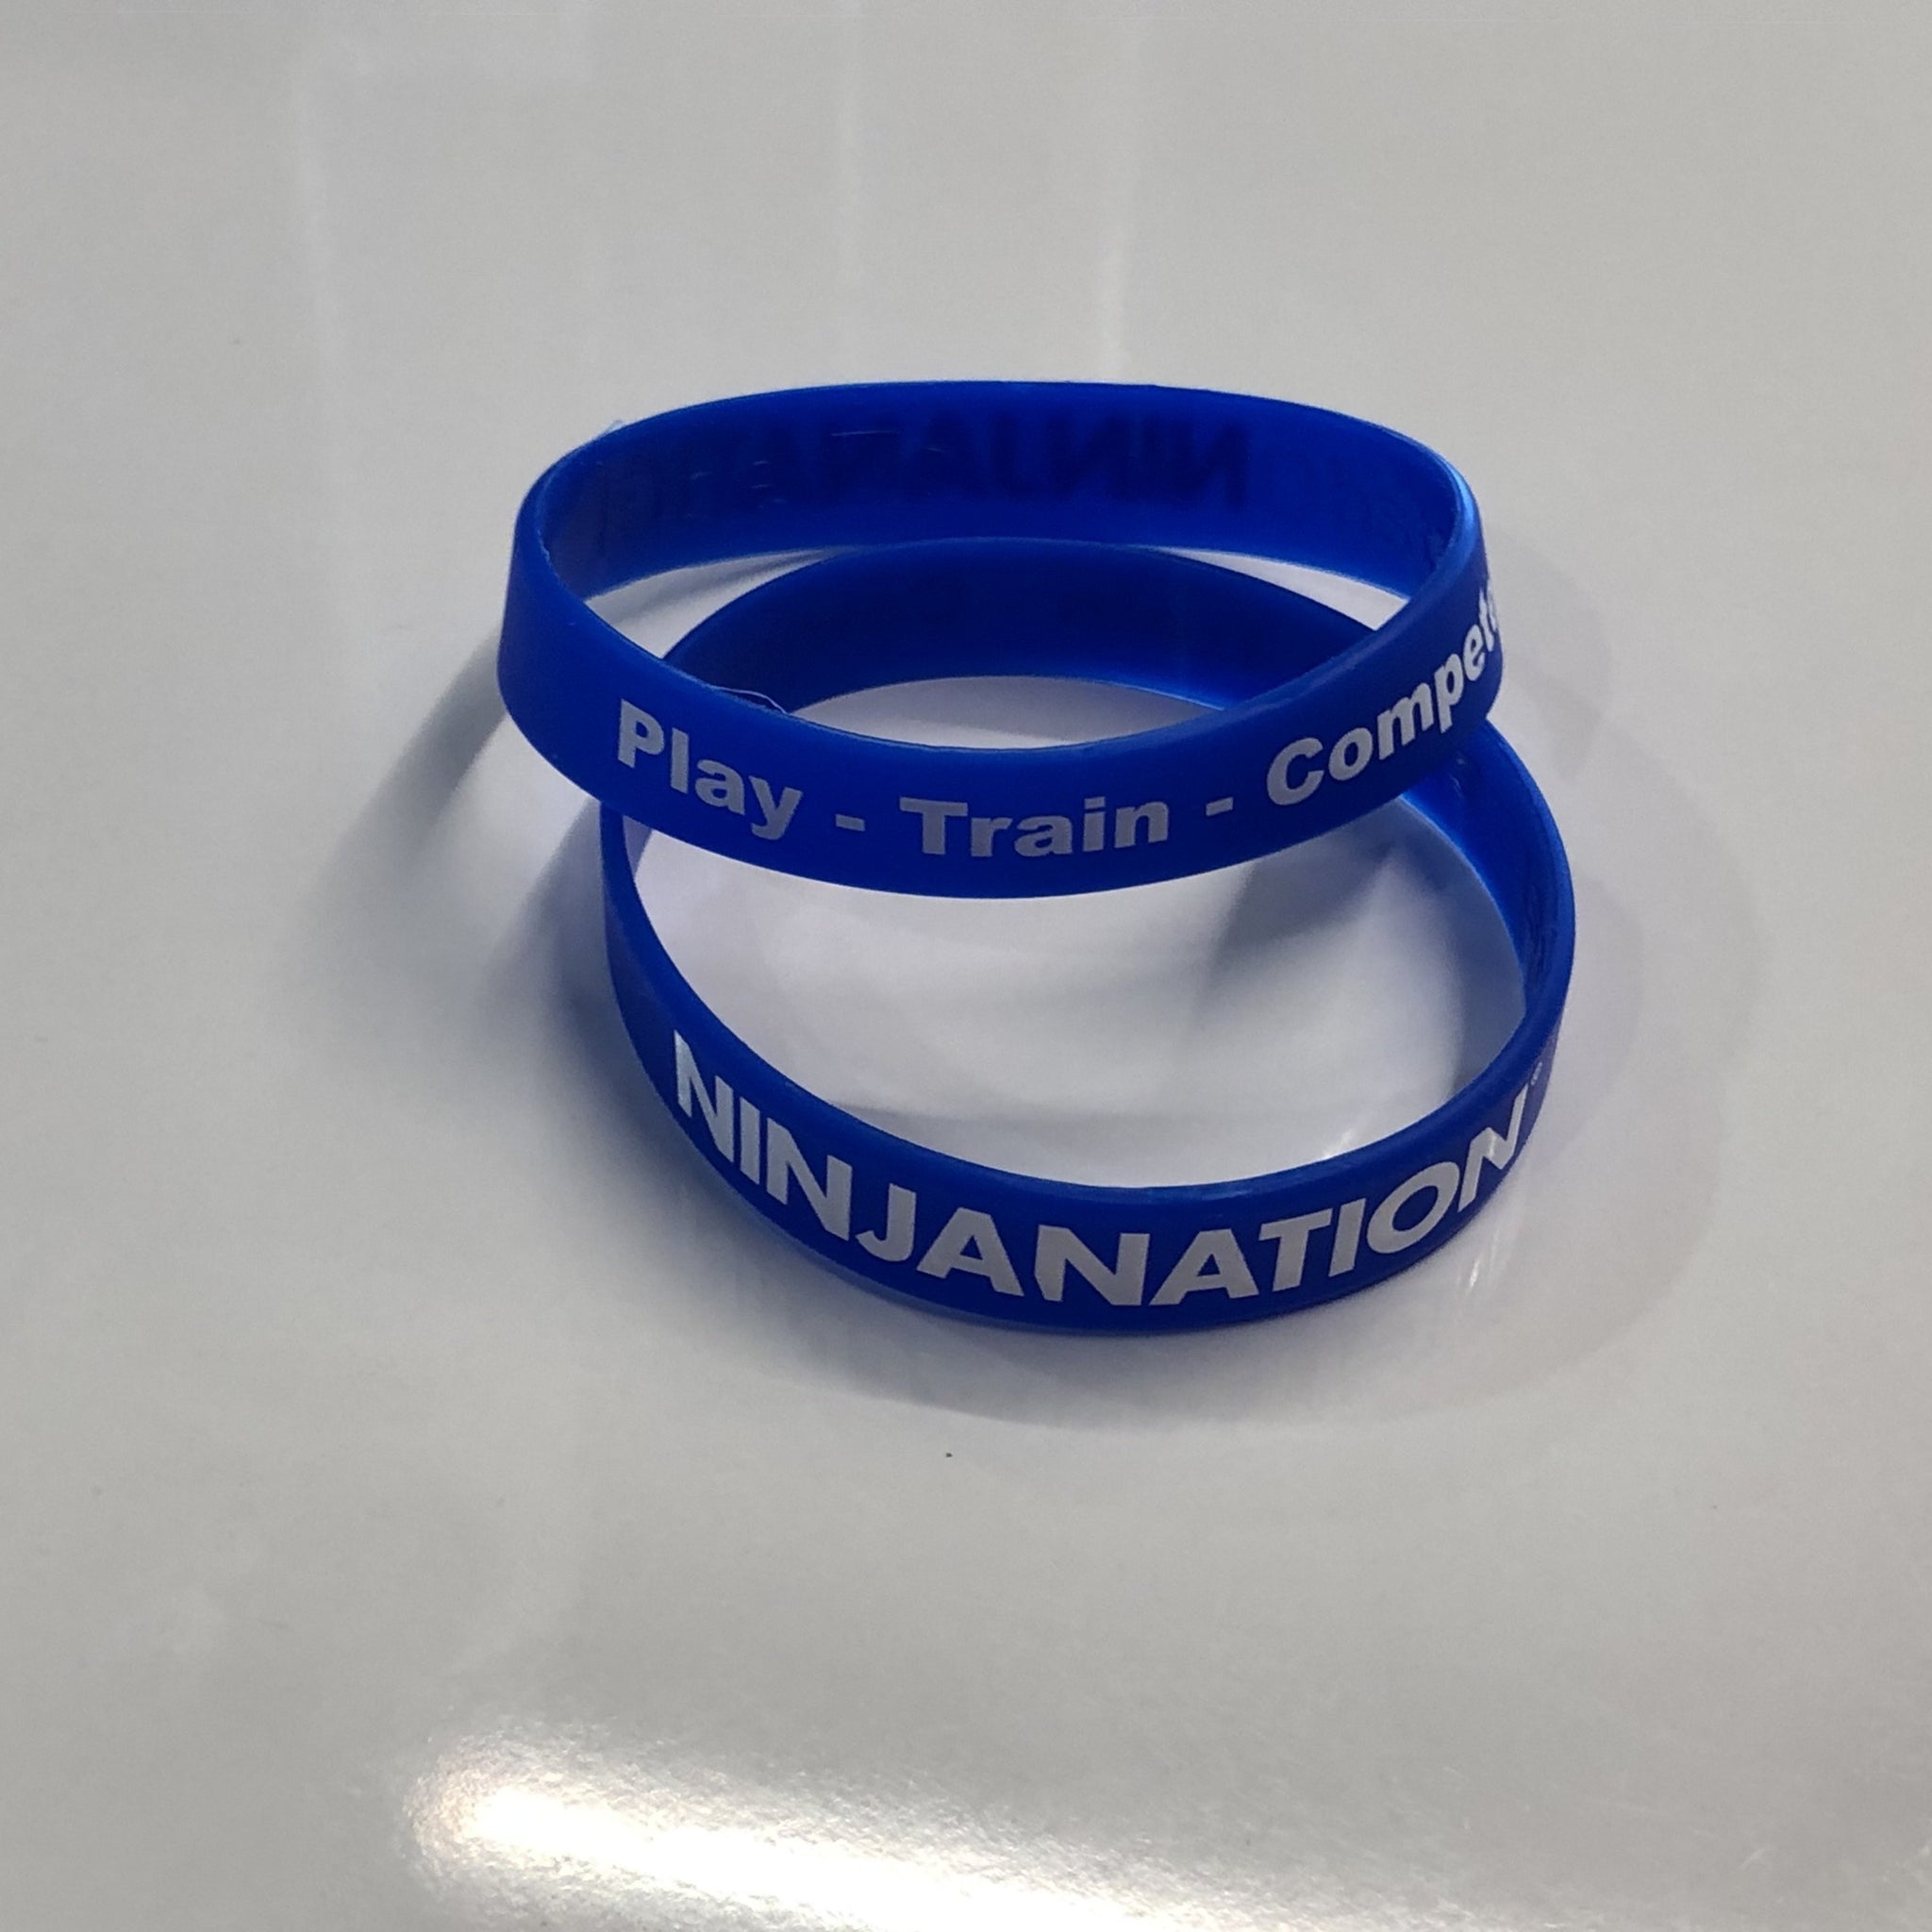 Custom Wristbands Personalized Silicone Bracelets Engrave Rubber Wristband  Customizable for Events, Gifts, Awareness,Party,Men, Women - Yahoo Shopping